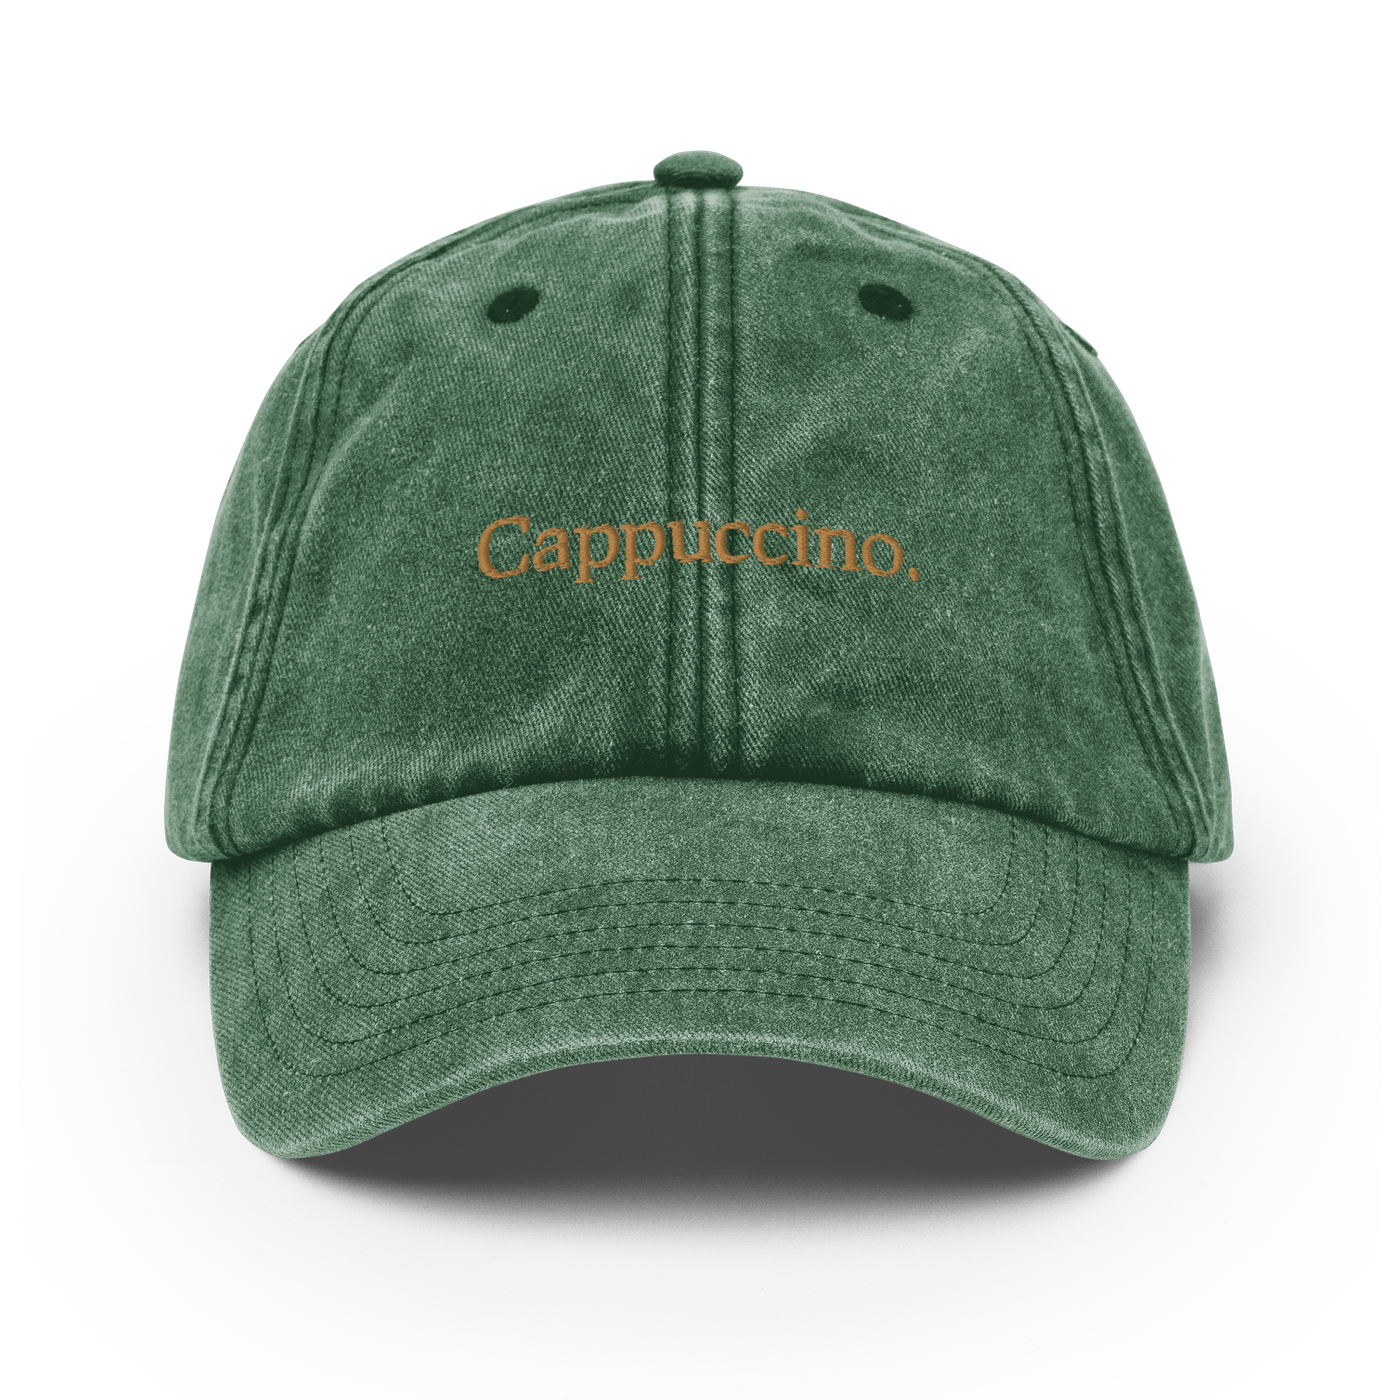 Cappuccino. Vintage Hat - Vintage Bottle Green - - Just Another Cap Store